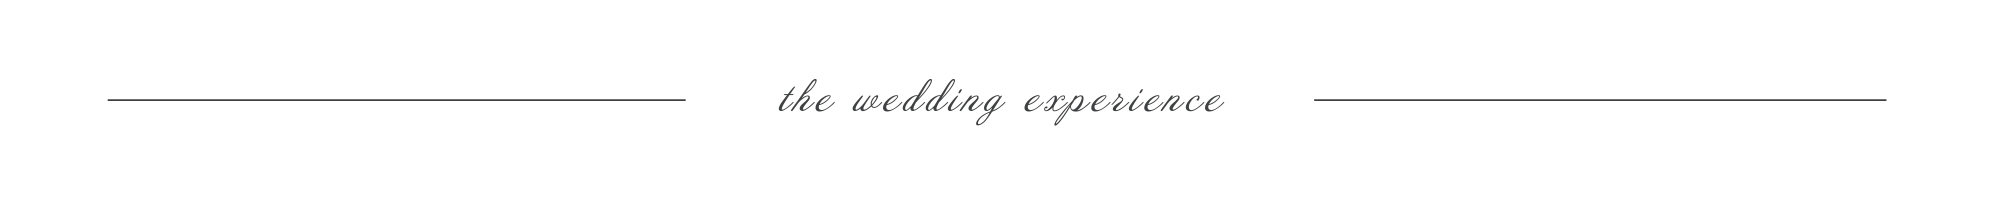 the wedding experience 